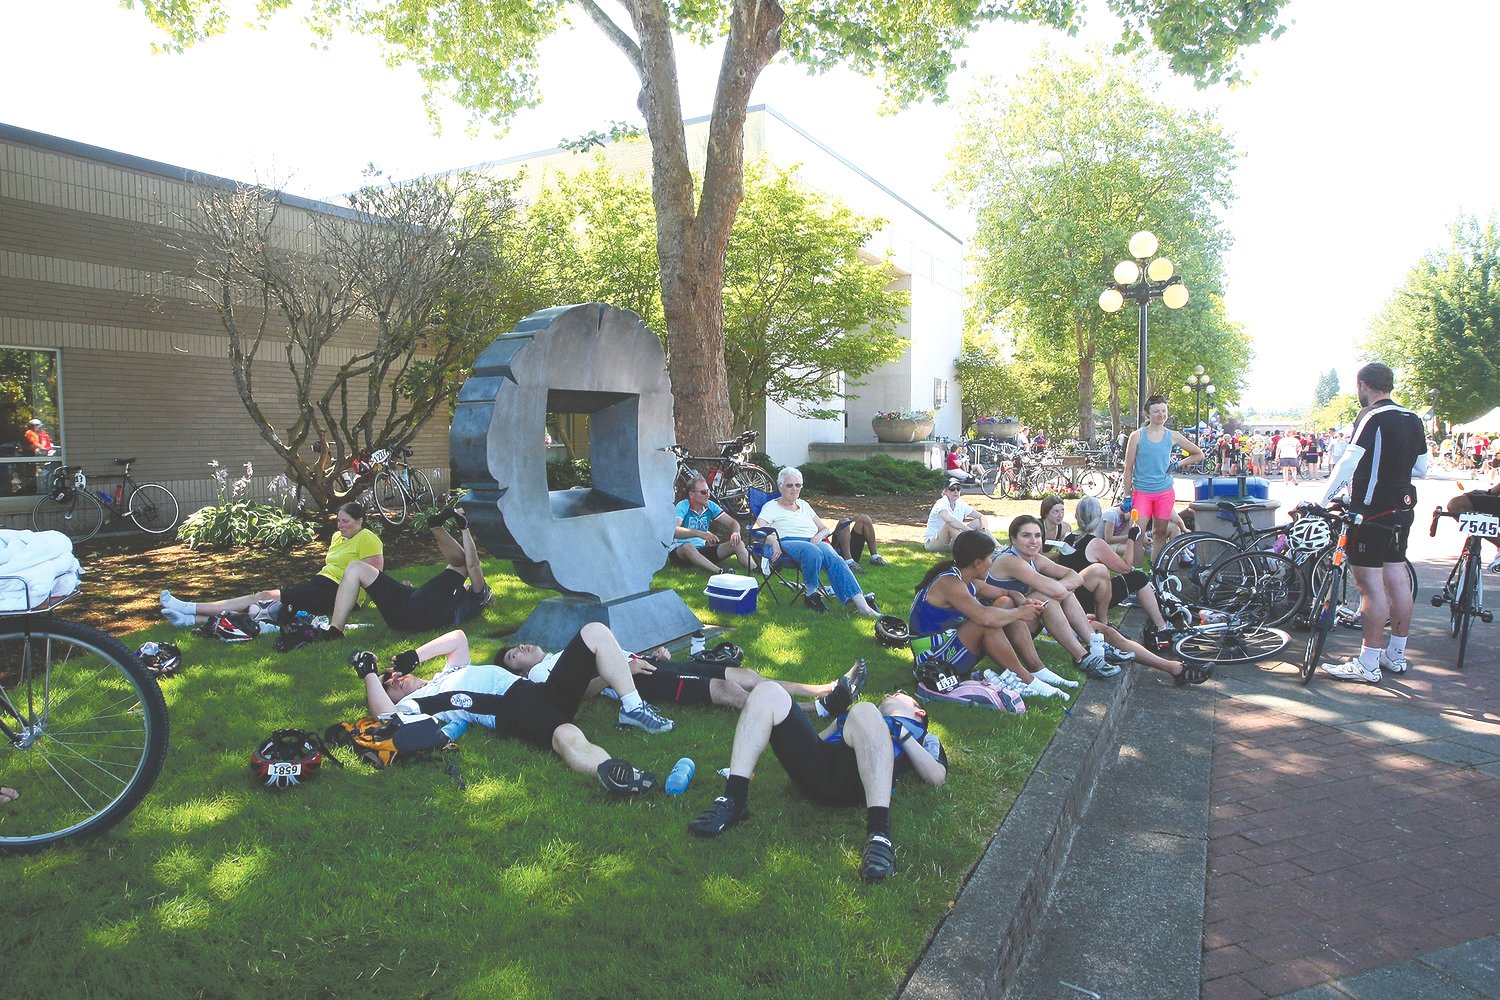 Riders packed together in the shade of the trees on the Centralia College campus to escape the heat and catch a breath in this 2014 Chronicle file photo.